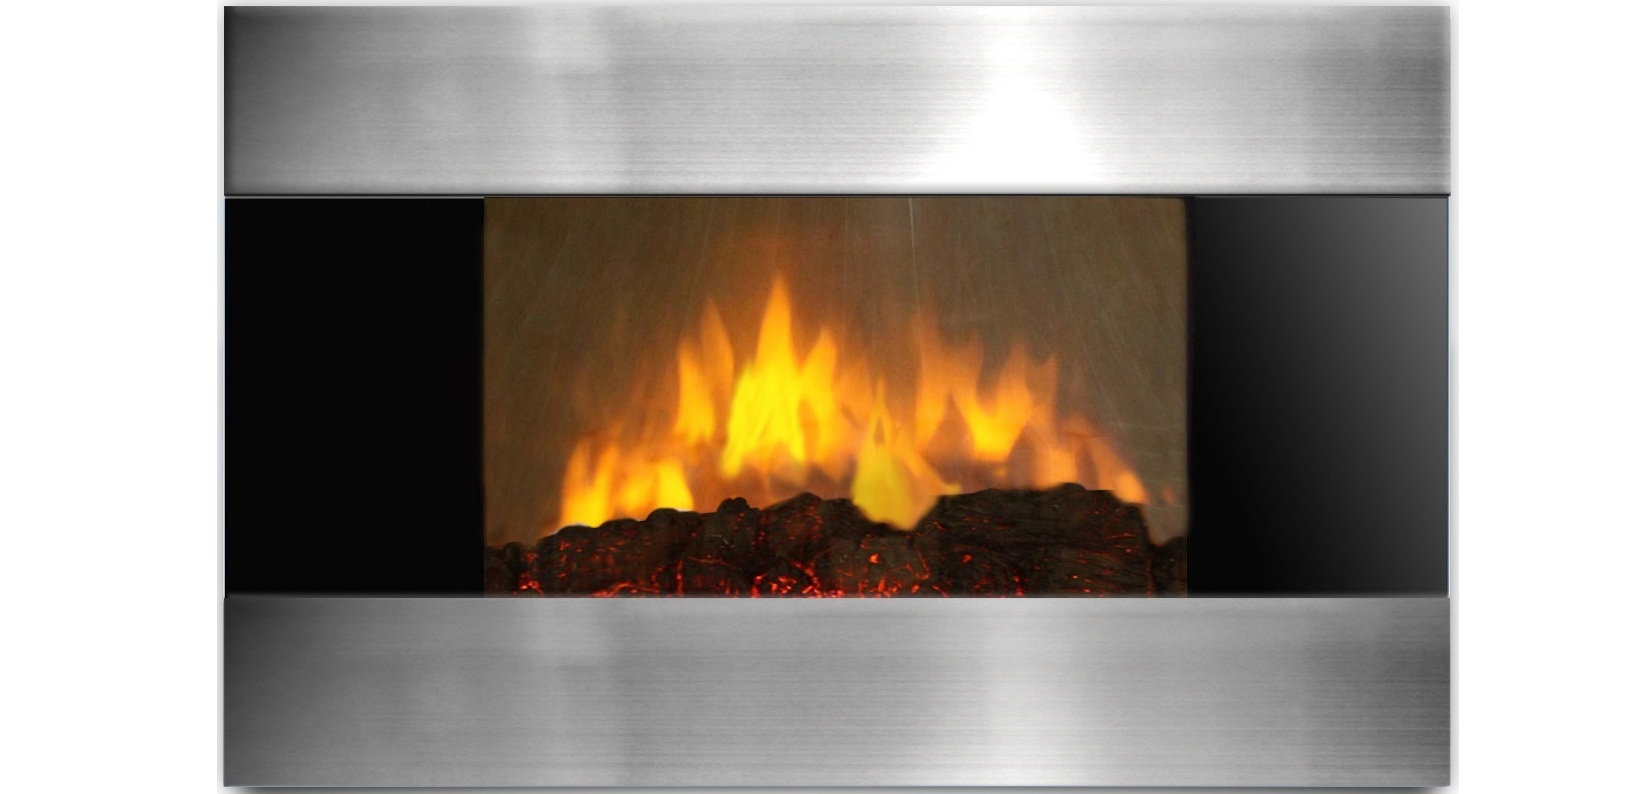 AmbionAir Flame 36 Electric Wall Mount Fireplace EF 1510 SL